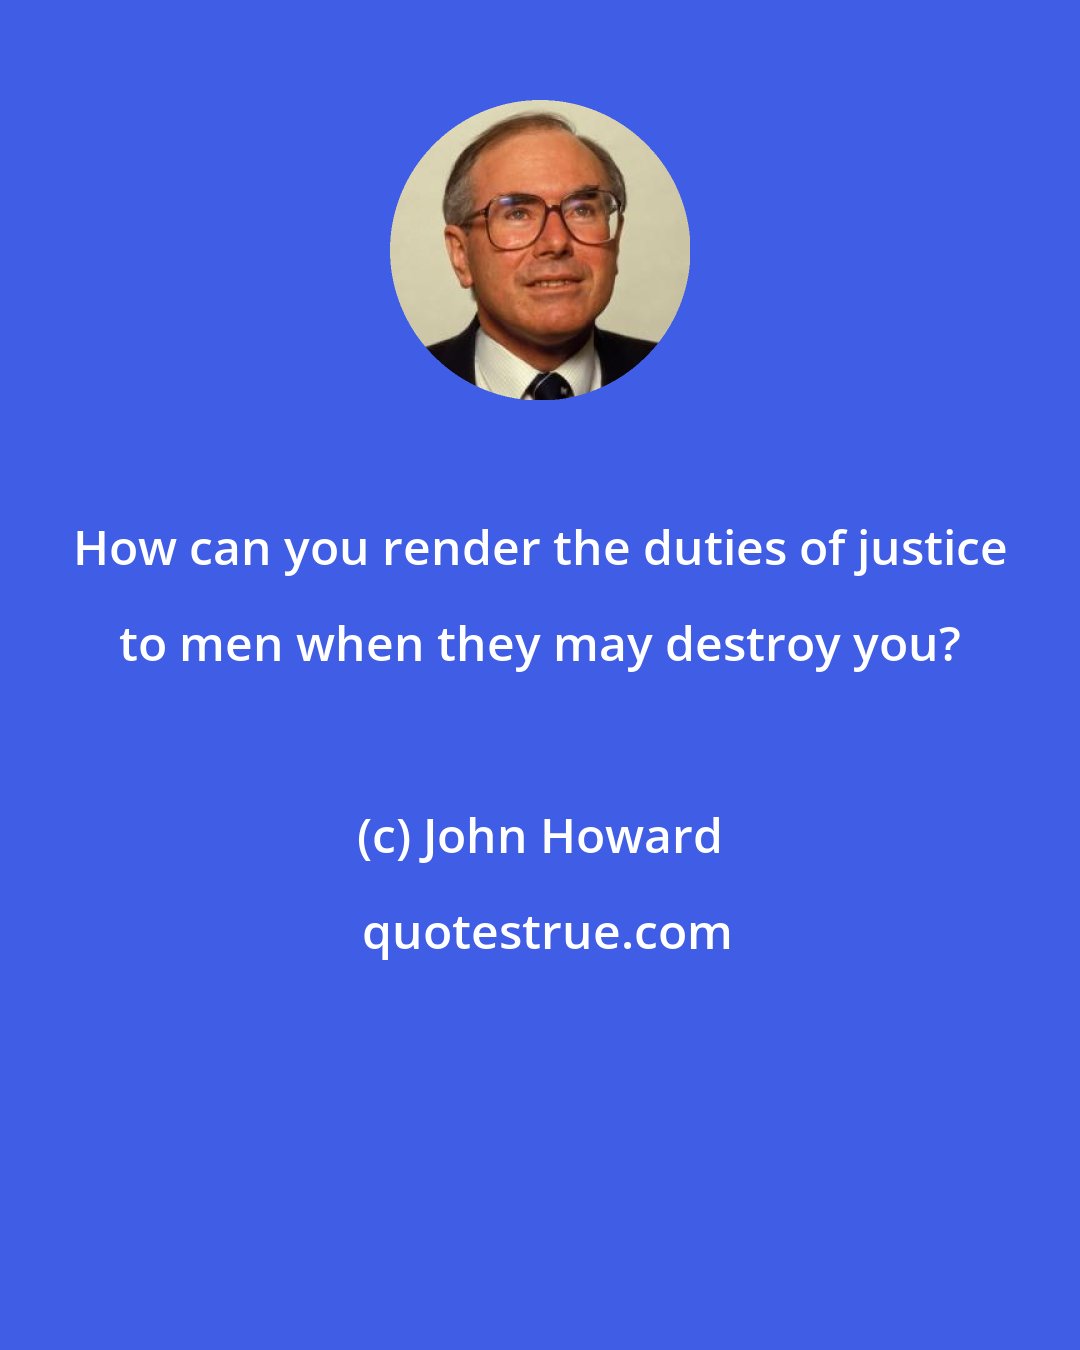 John Howard: How can you render the duties of justice to men when they may destroy you?